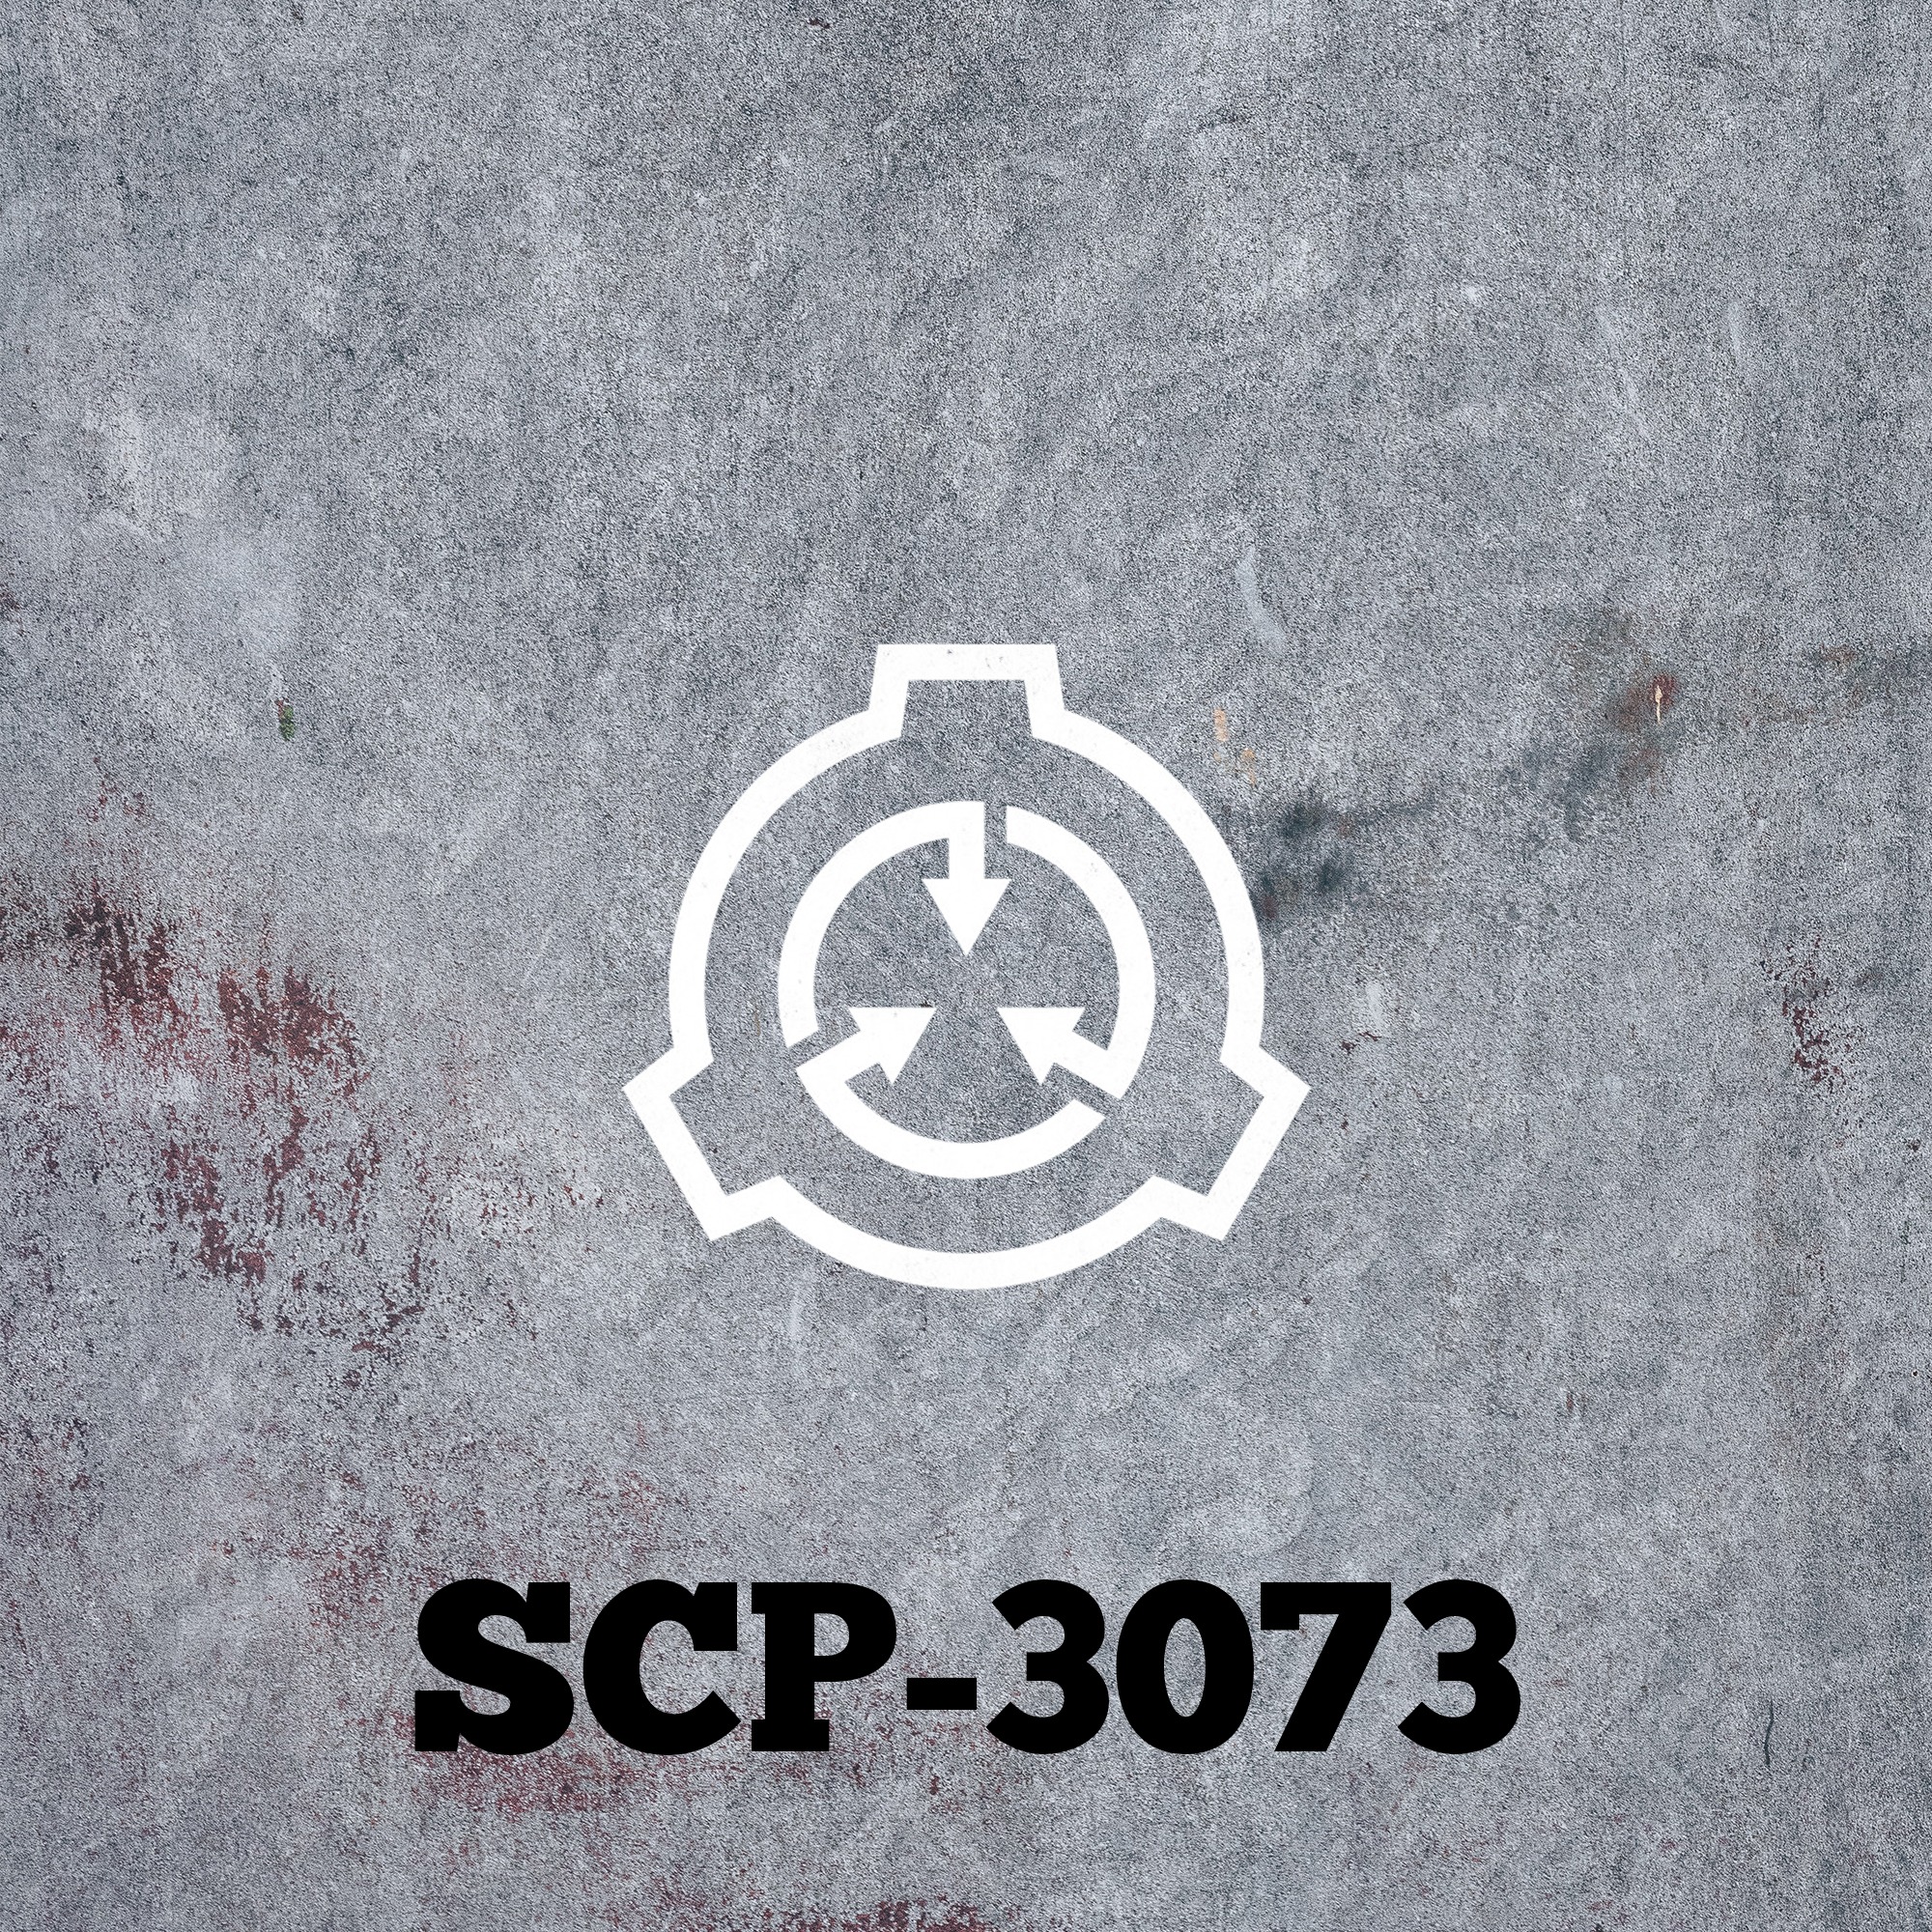 SCP-3073: All the Men And Women Merely Players